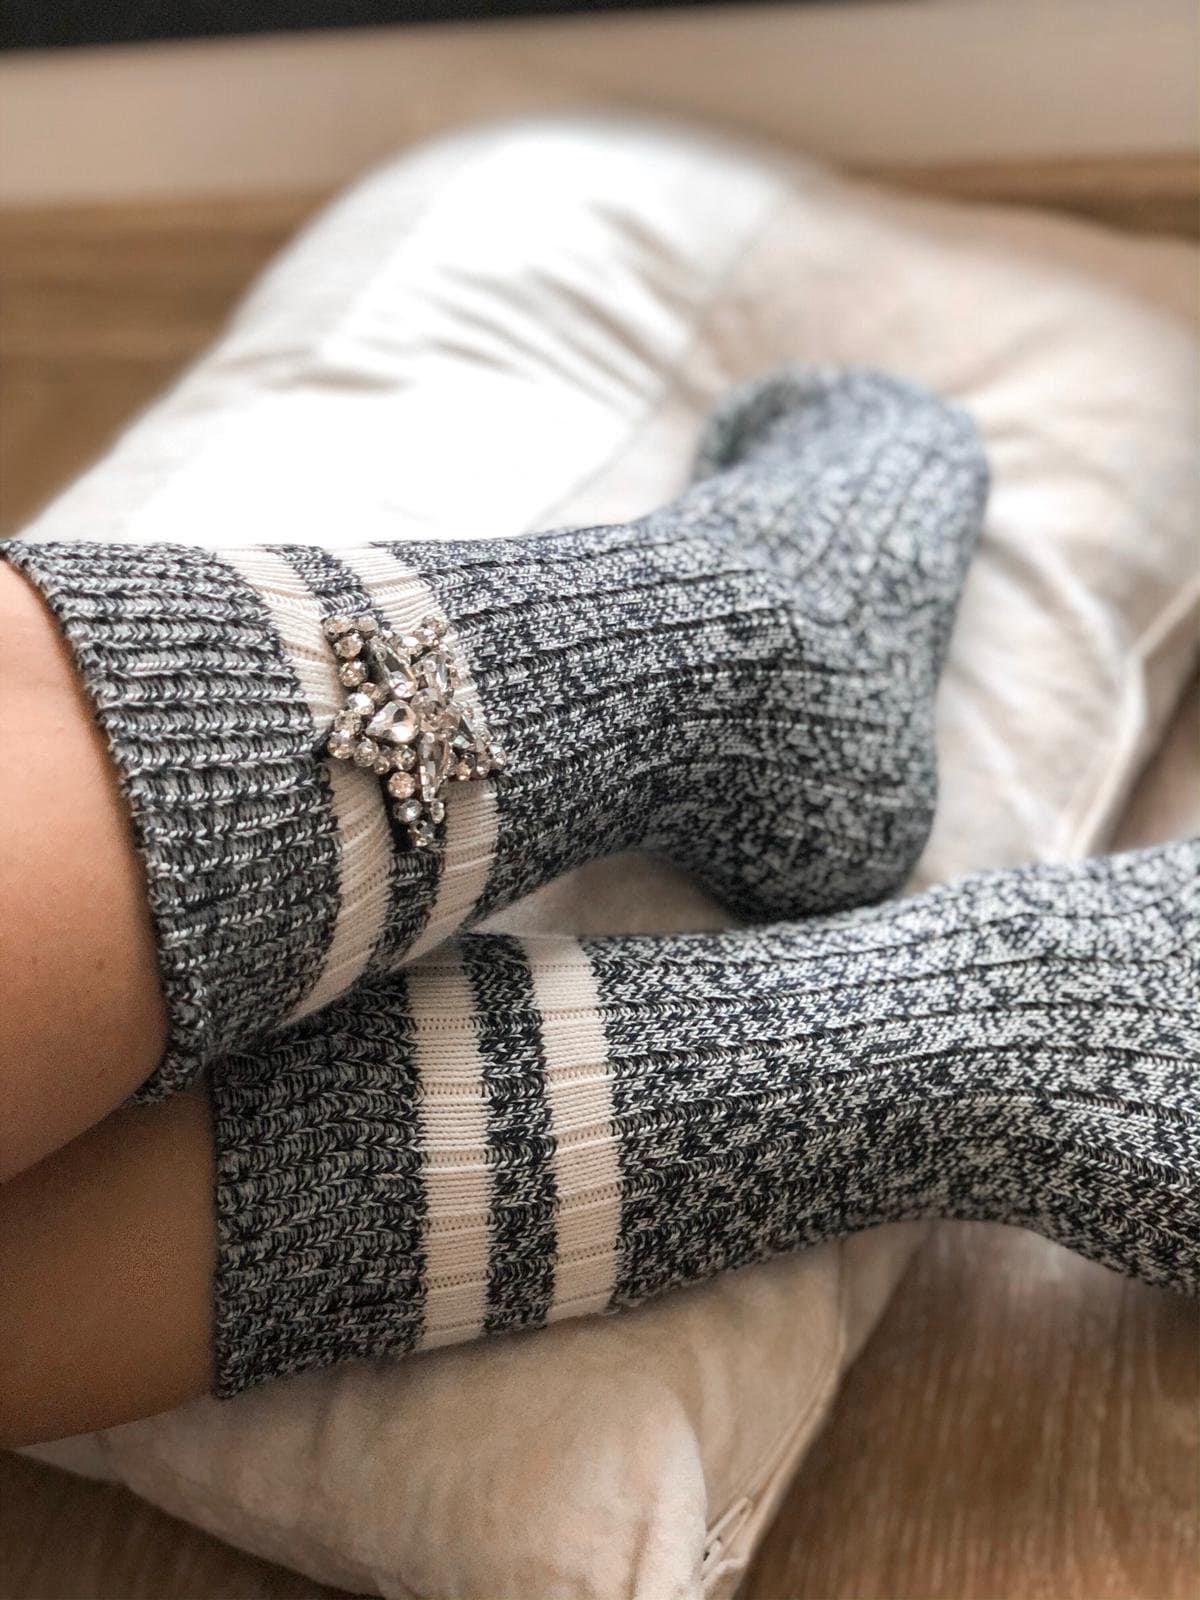 Premium Gray and White Handmade Socks with Star-Shaped Patches and Sparkling Rhinestones - Perfect for Special Occasions! available at Moyoni Design